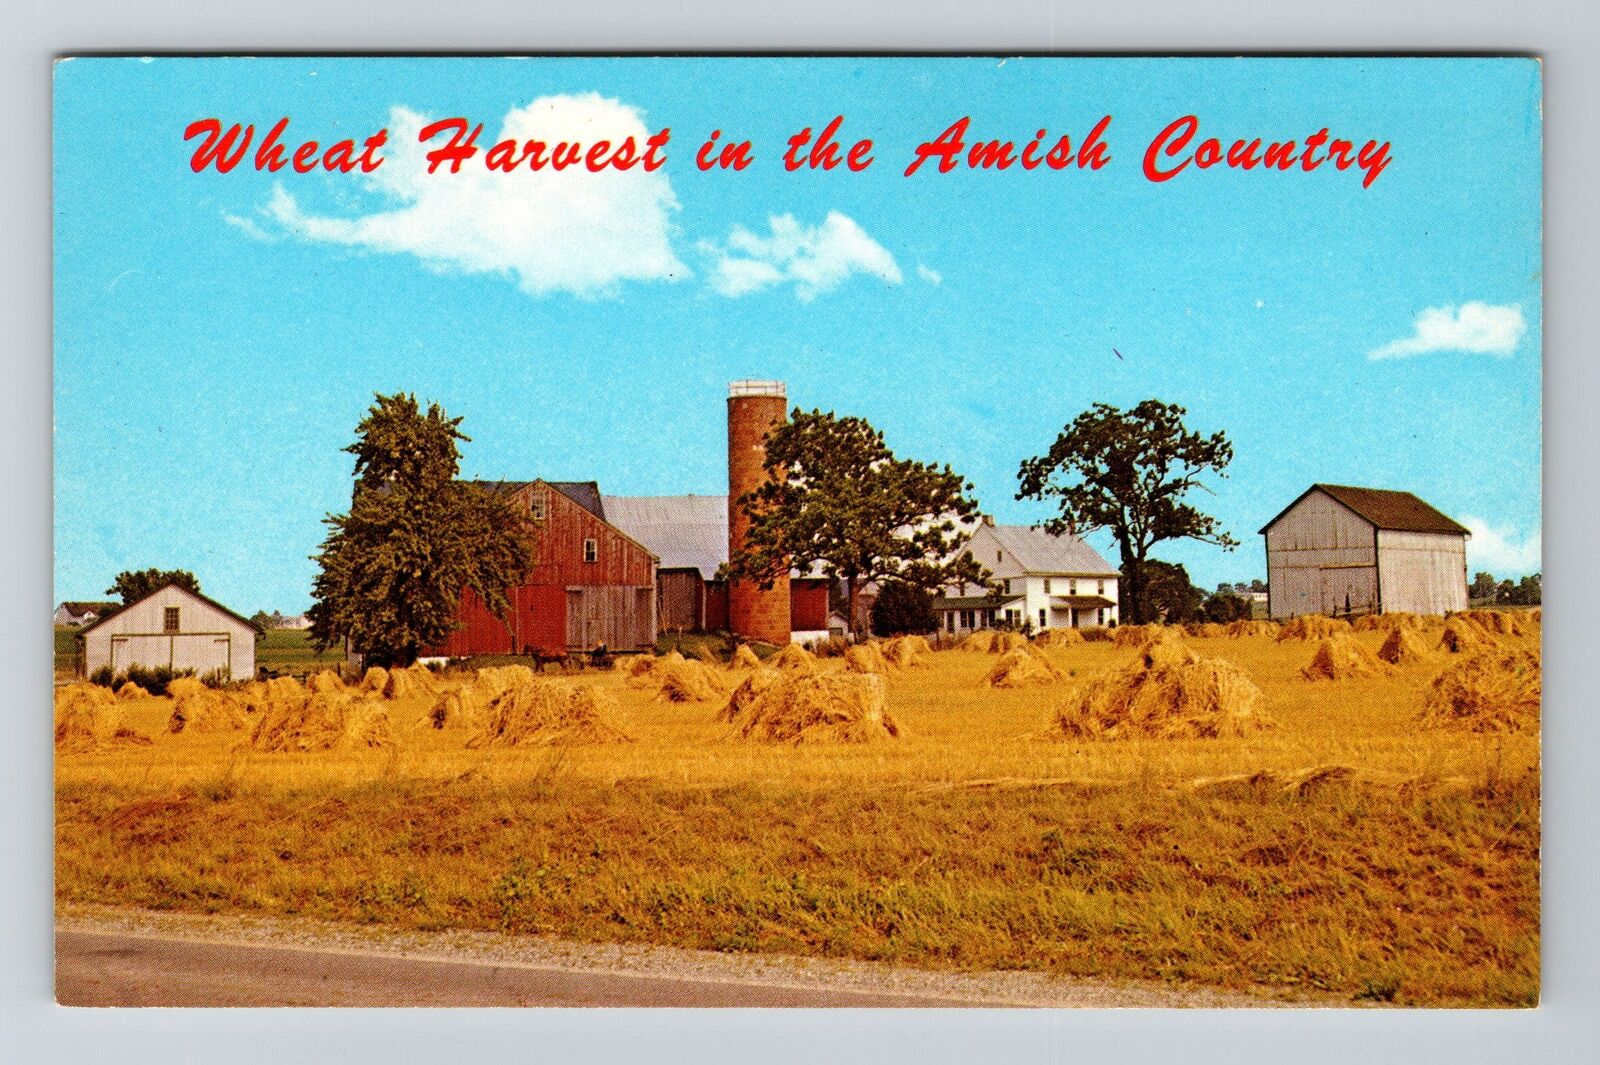 PA-Pennsylvania Amish Country Wheat Harvest Typical Farm Vintage Postcard